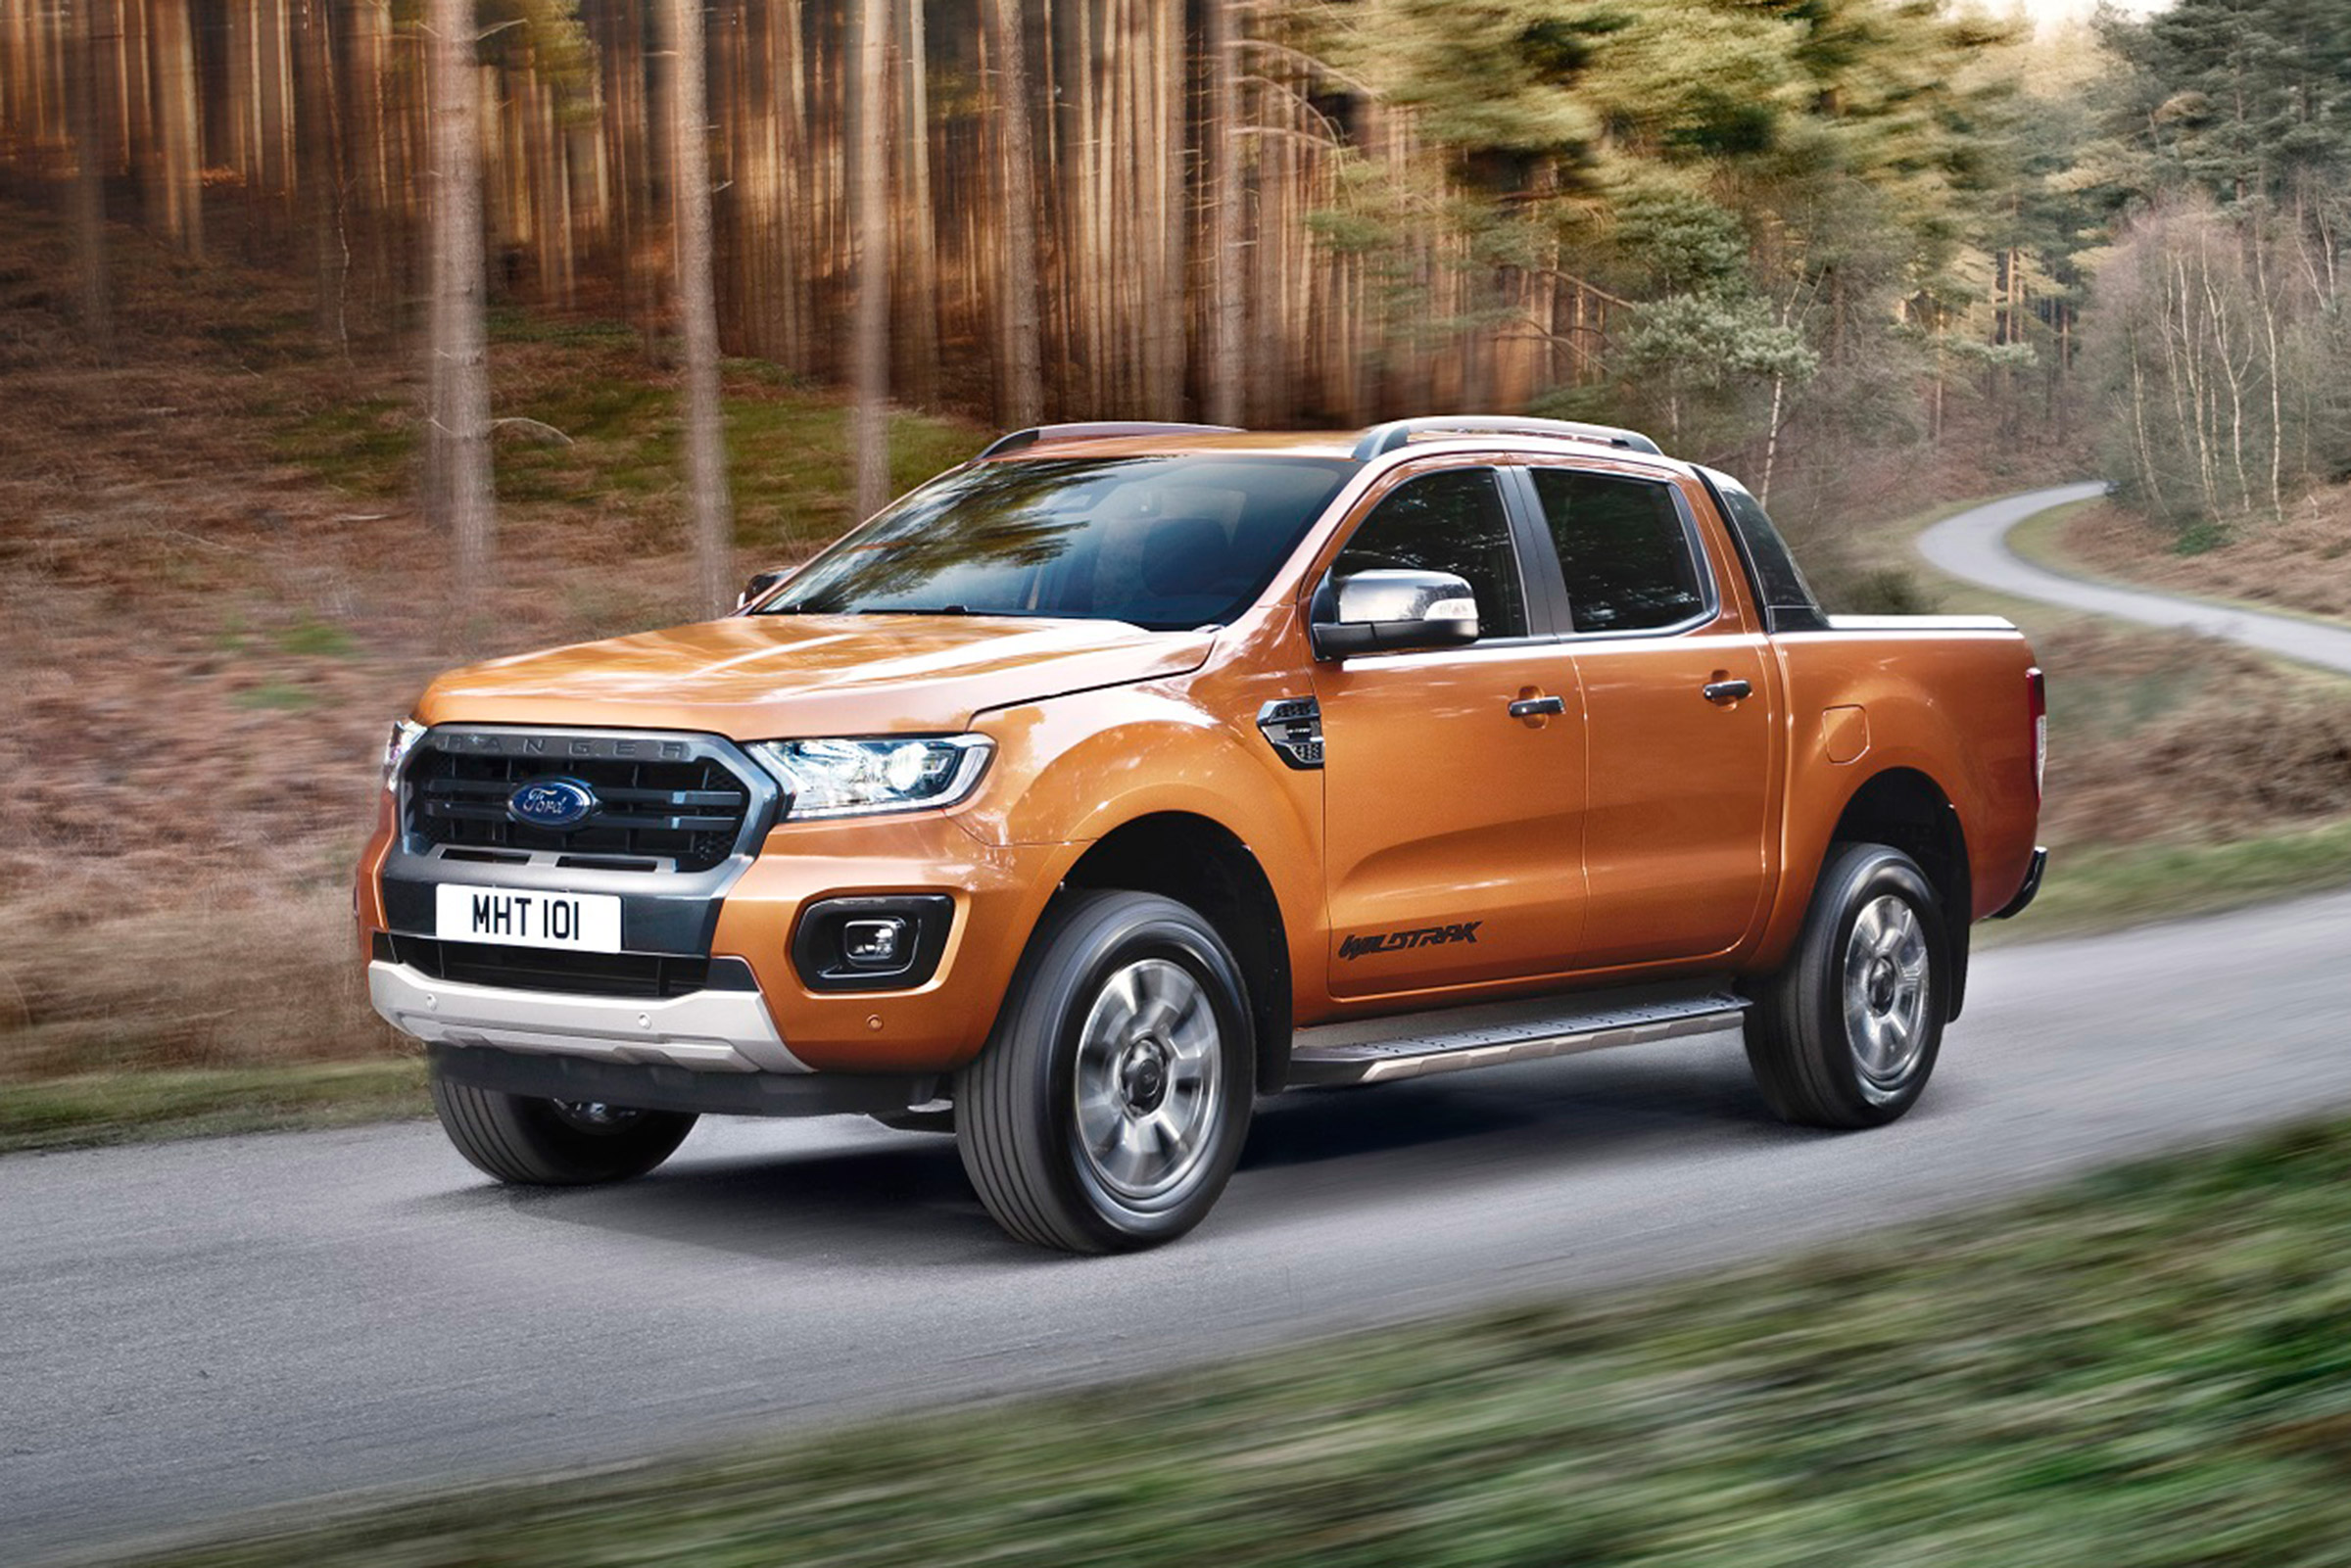 New 2019 Ford Ranger facelift adds more kit and more power ...